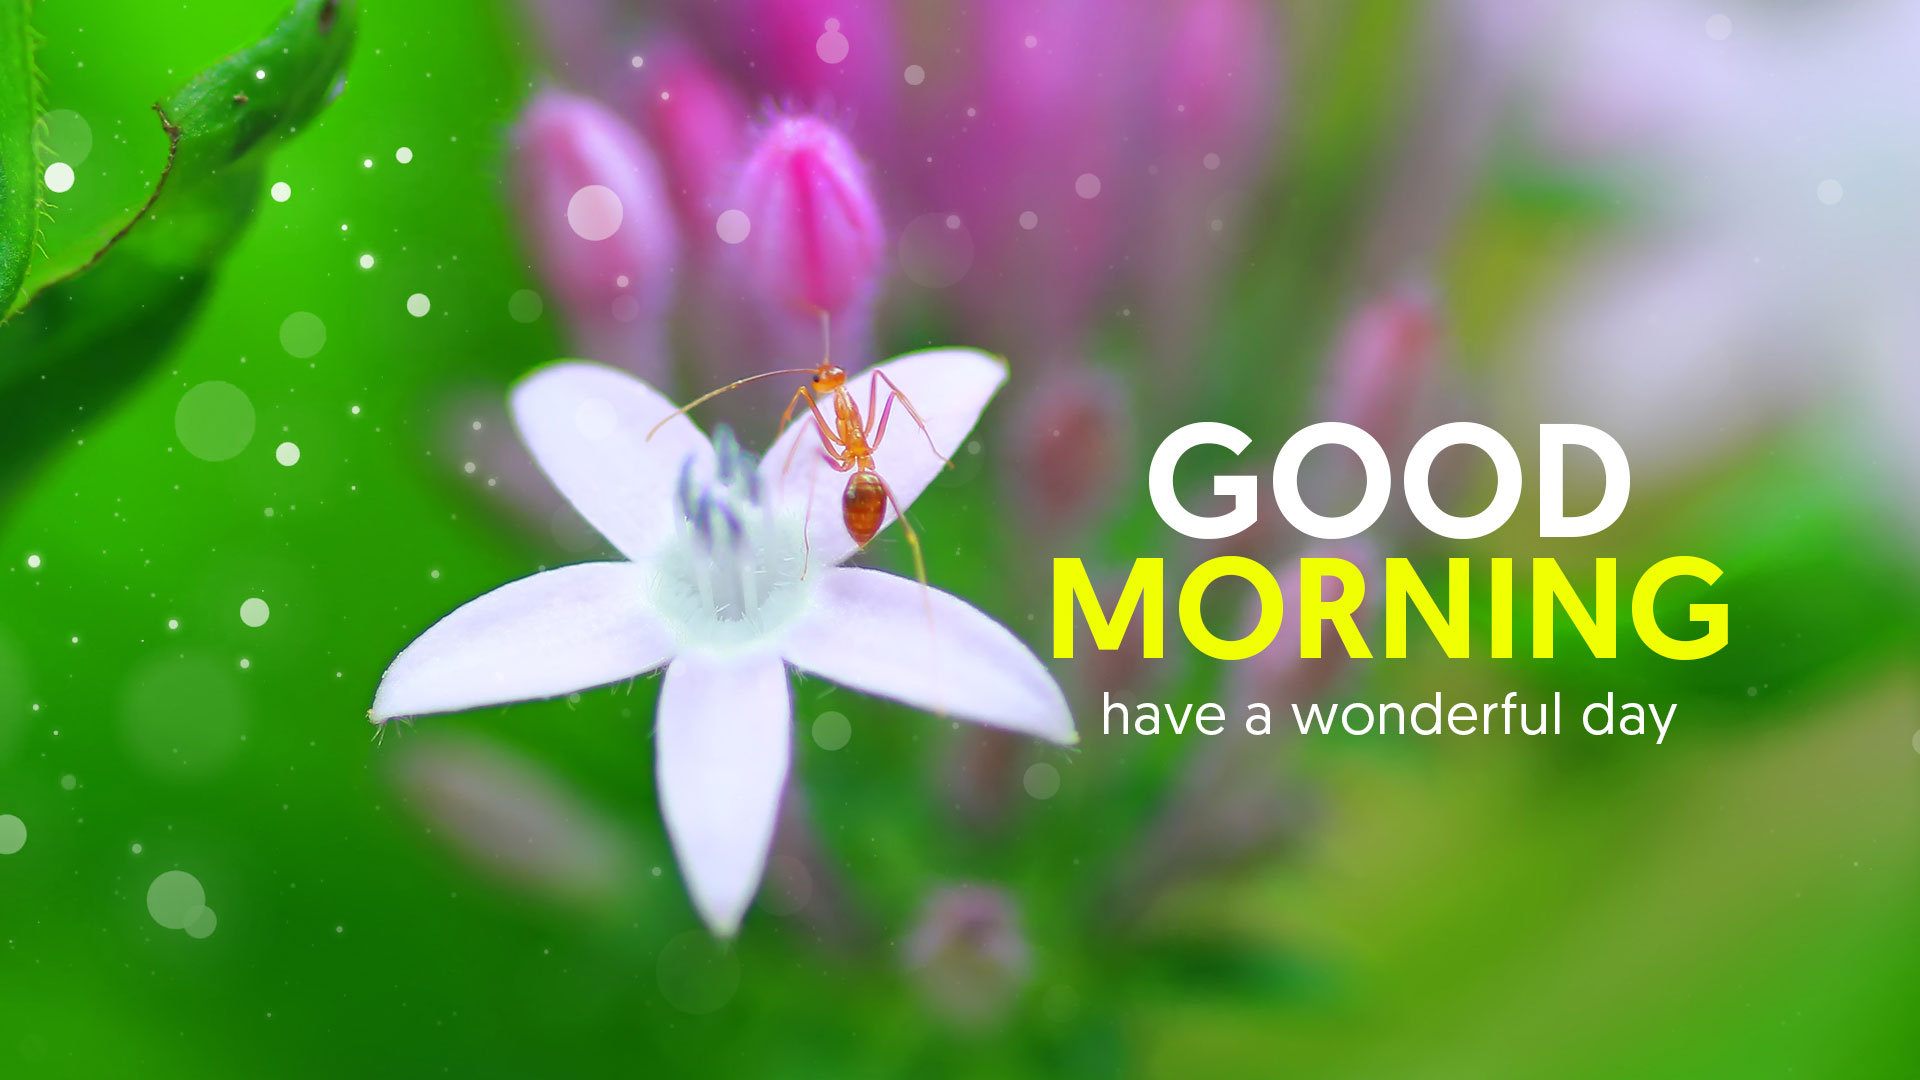 50+ Good Morning Status Video for WhatsApp Download in HD